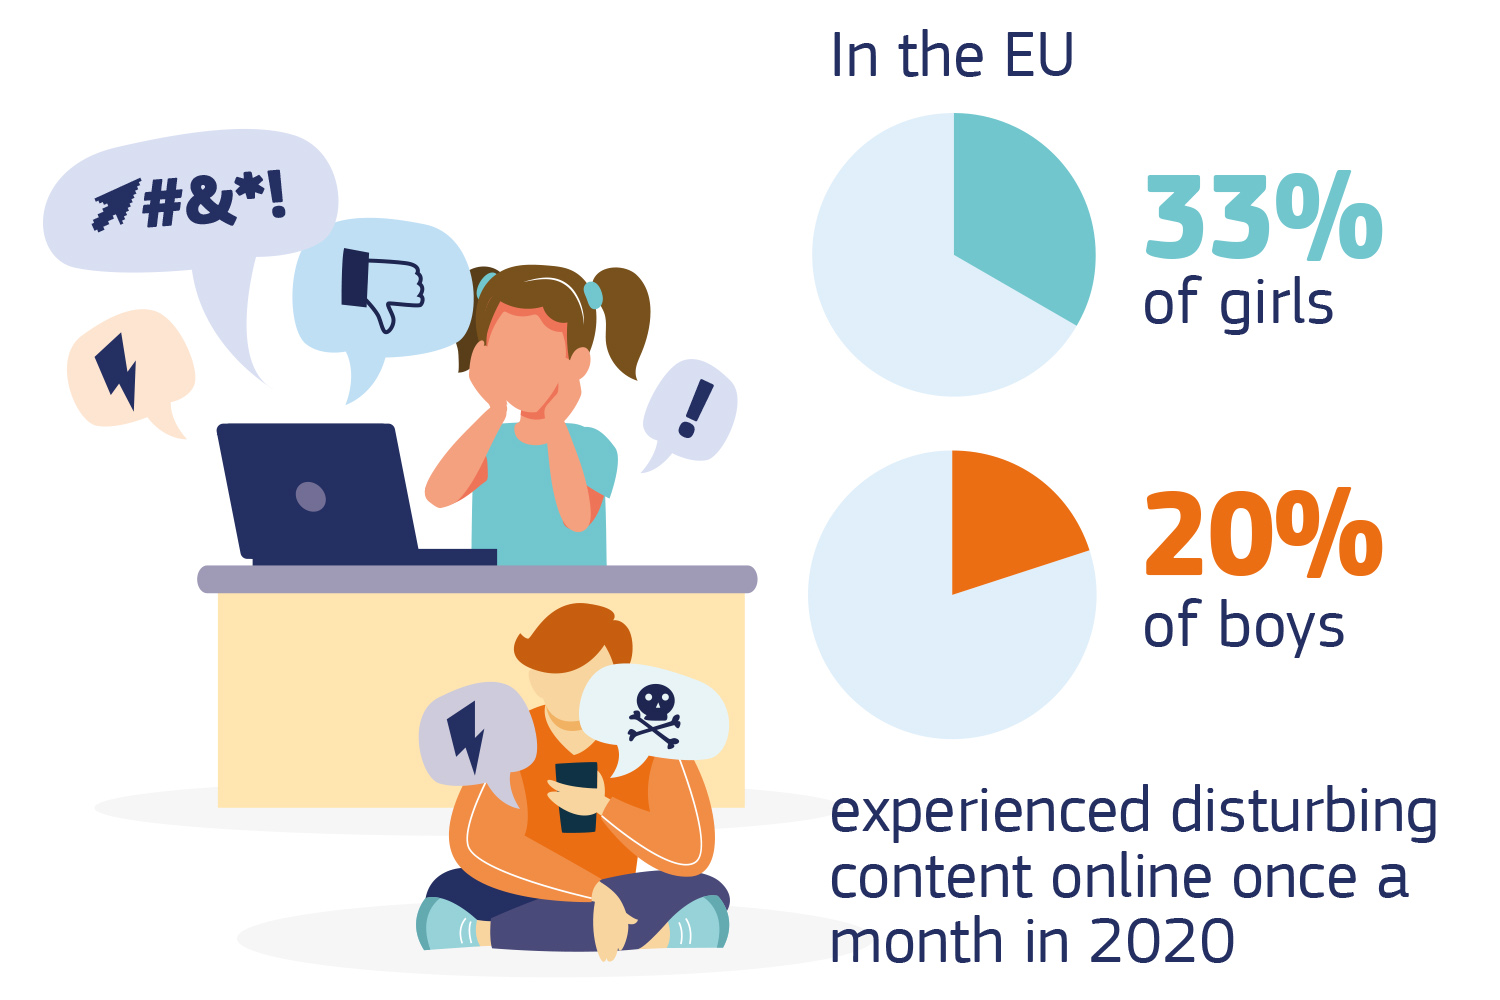 In the EU 33% of girls and 20% of boys experienced disturbing content online once a month in 2020